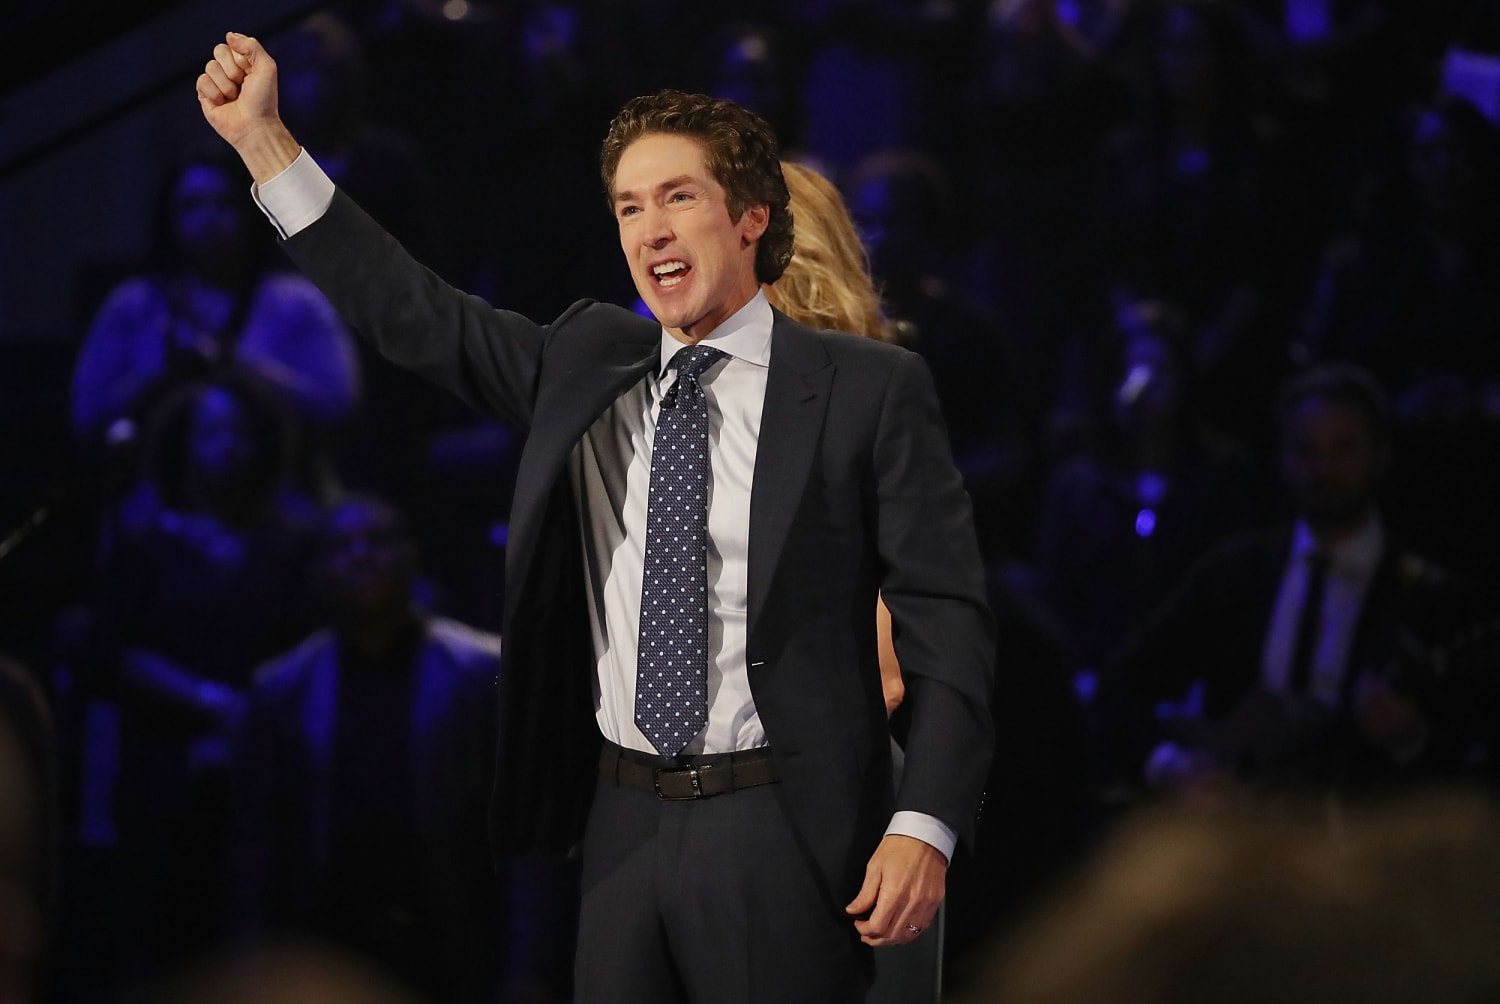 Plumber finds cash, checks behind loose toilet in wall at Joel Osteen’s Lakewood Church